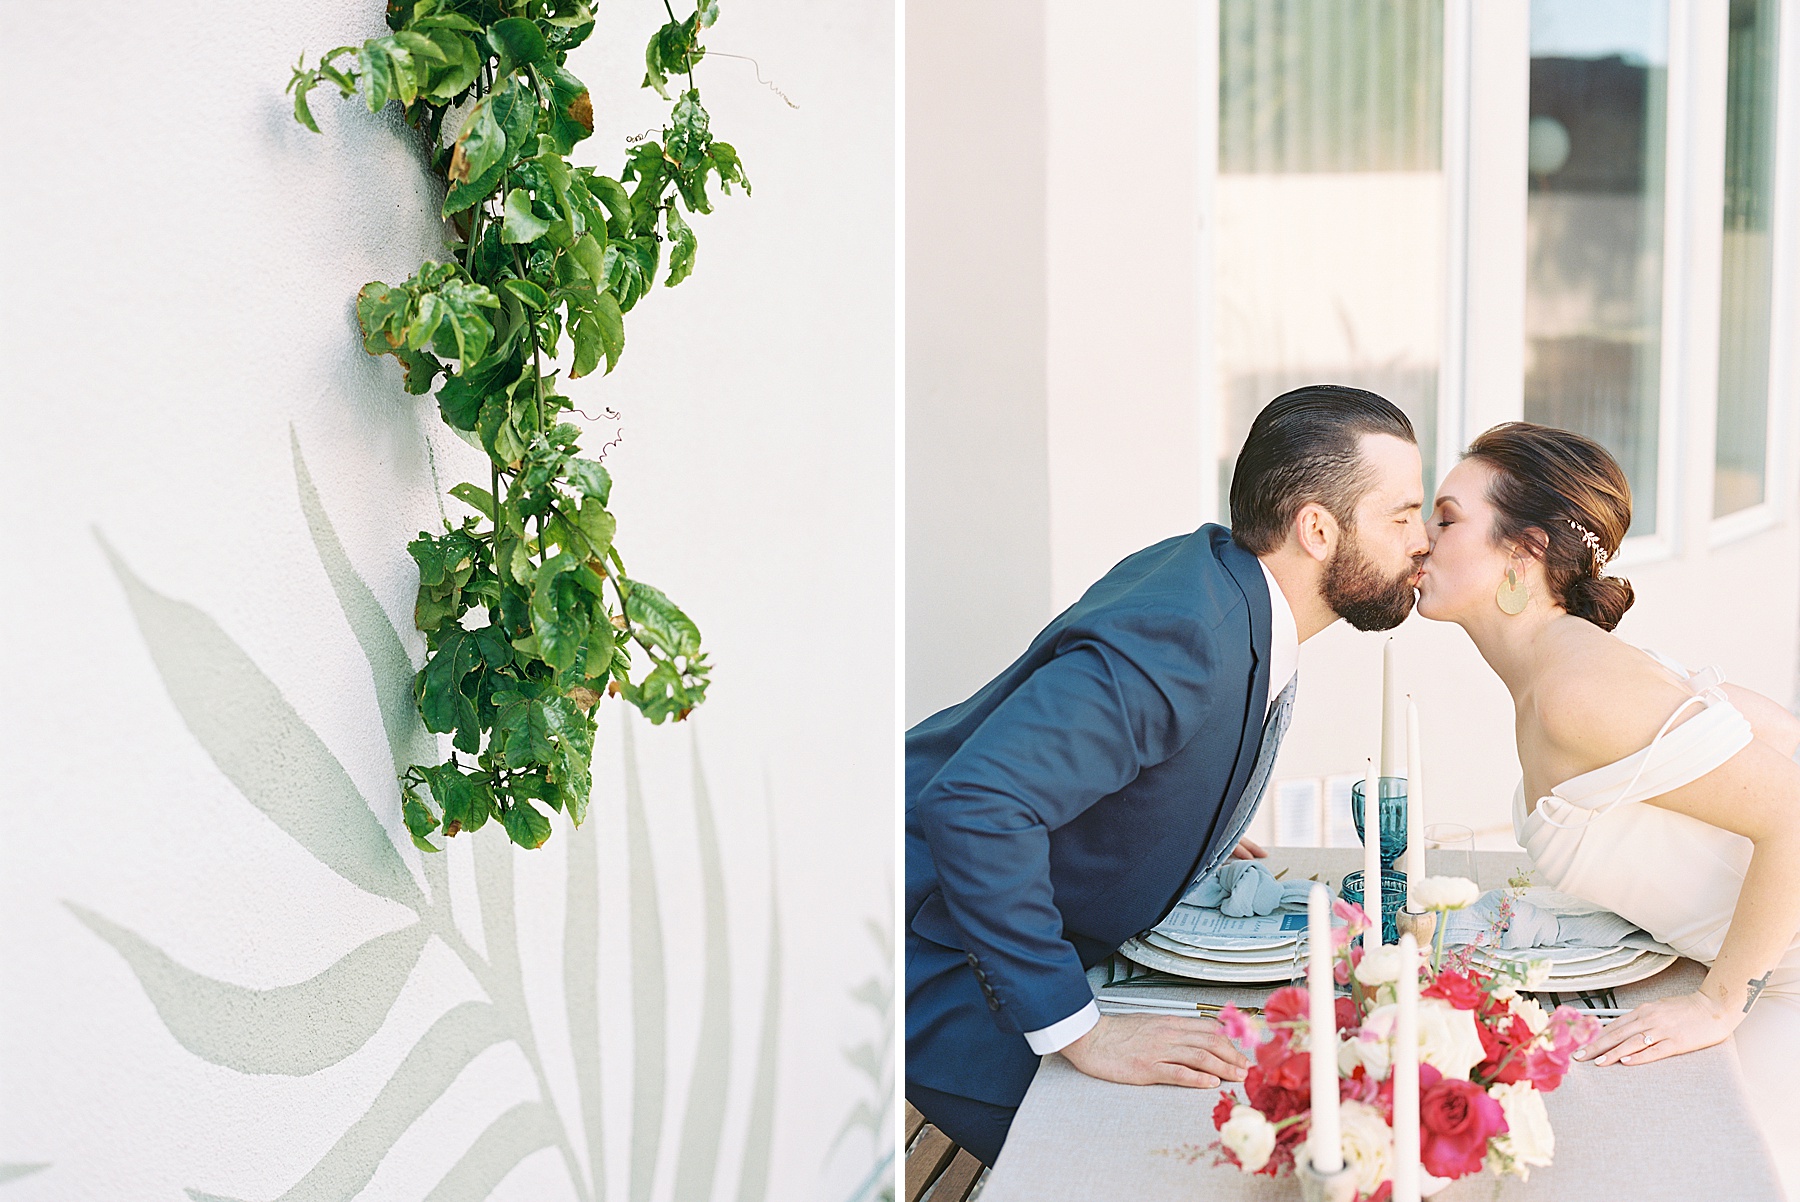 Grecian Inspired Micro-Wedding with Events by Kristina Elyse - Ash Baumgartner - Inspired by This - Sonoma Wedding Photographer_0019.jpg